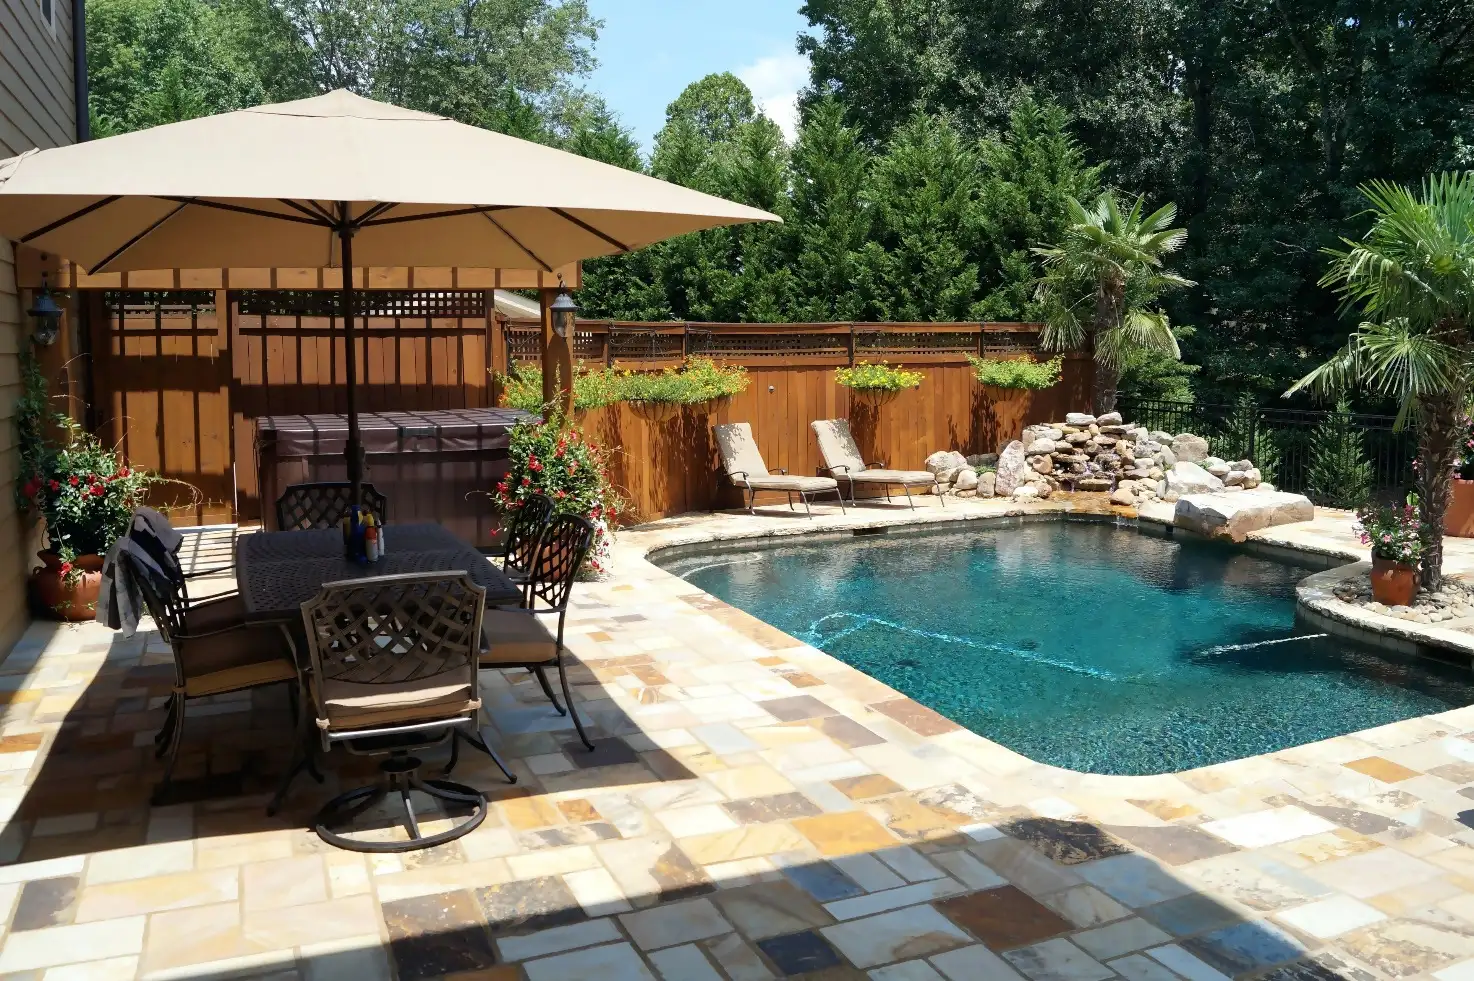 Additional Furniture For A Patio With A Pool